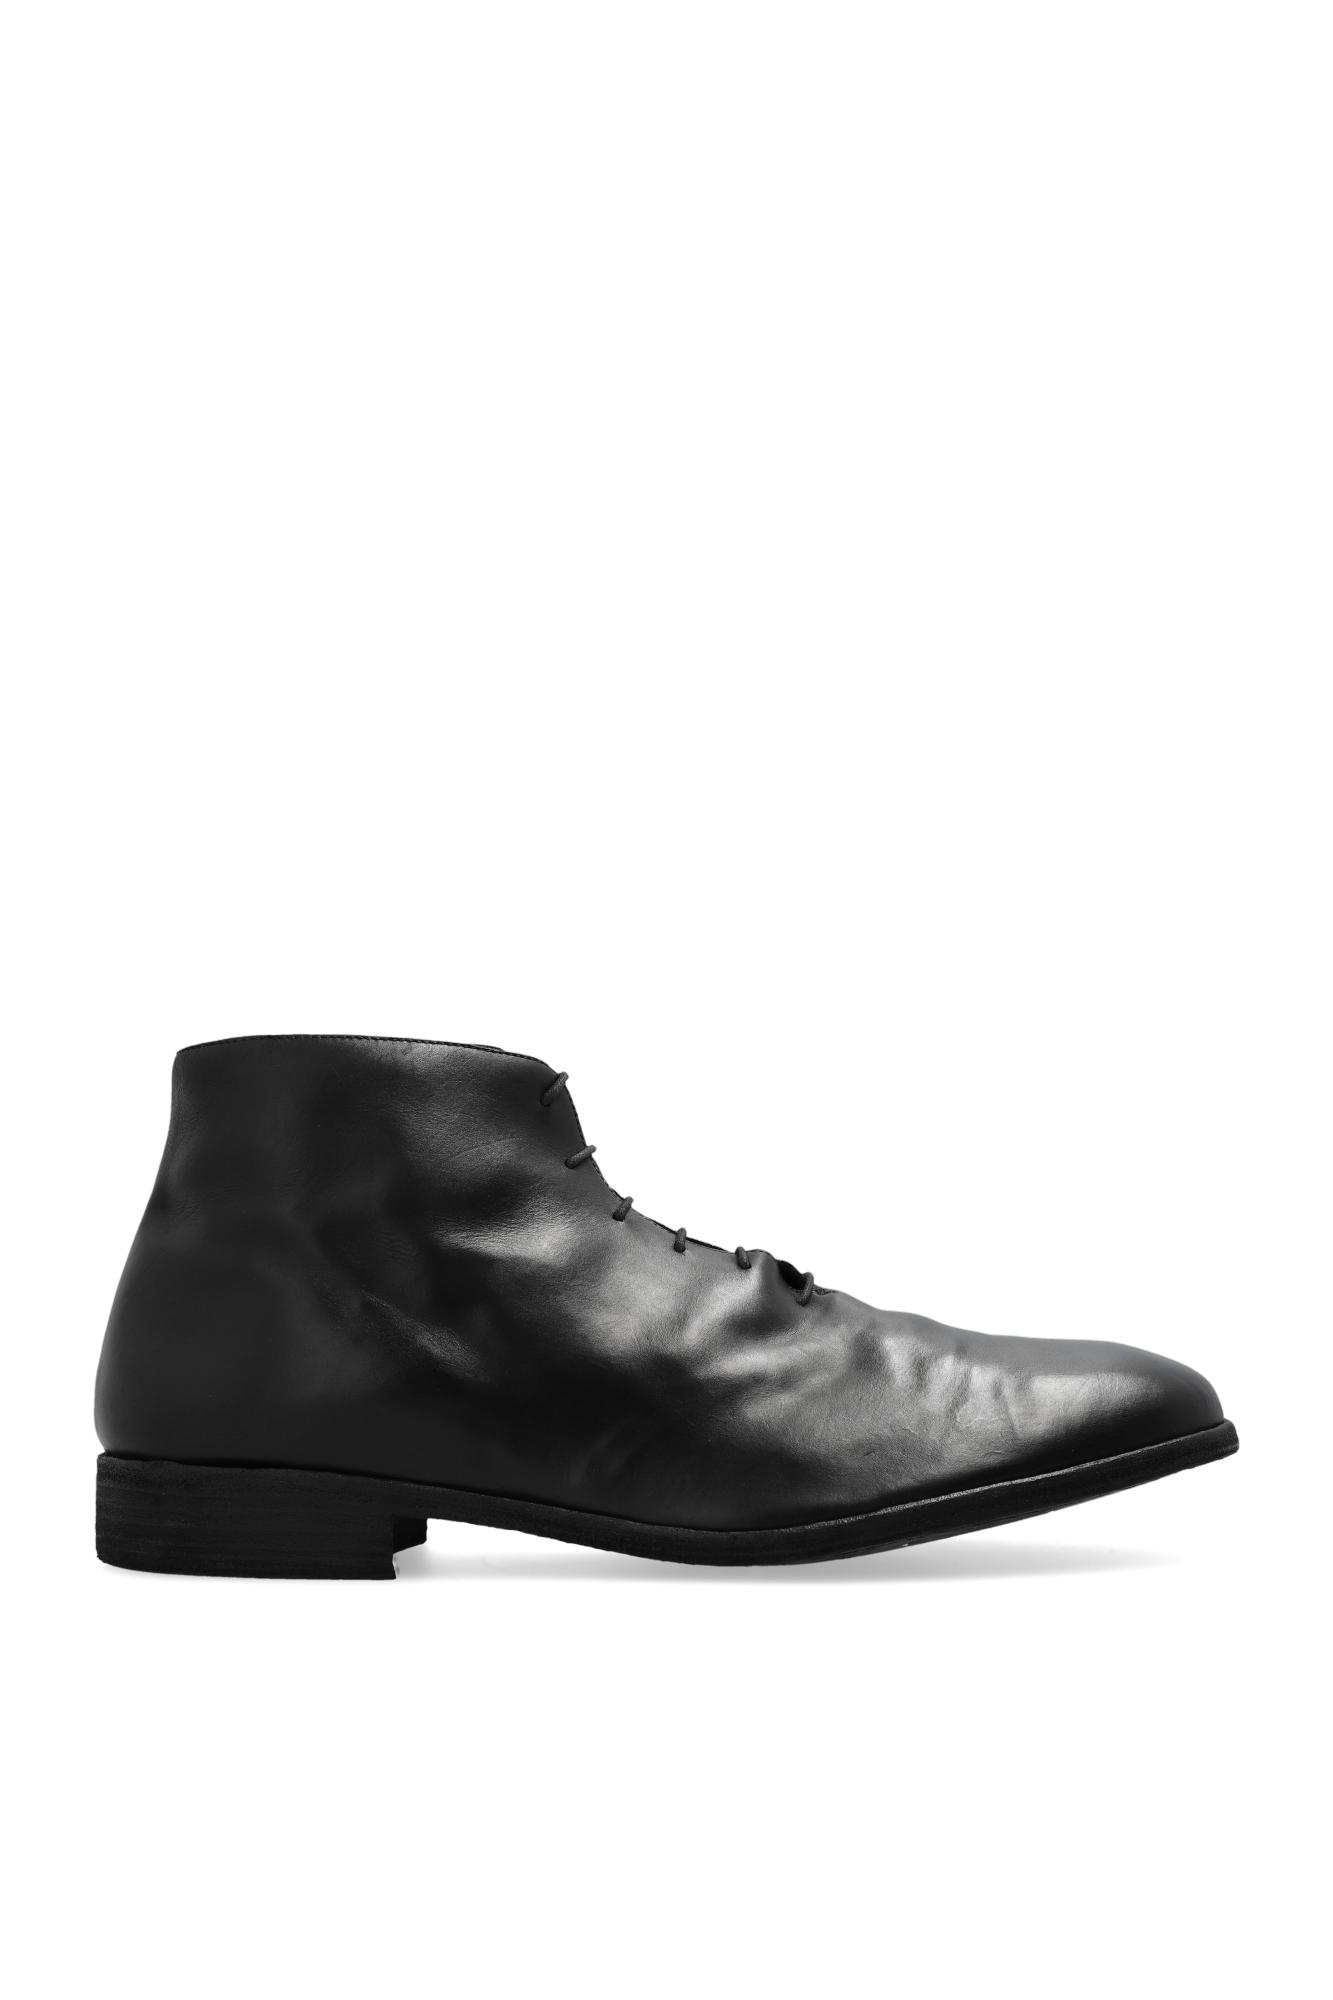 PETROSOLAUM Leather Ankle Boots in Black for Men | Lyst